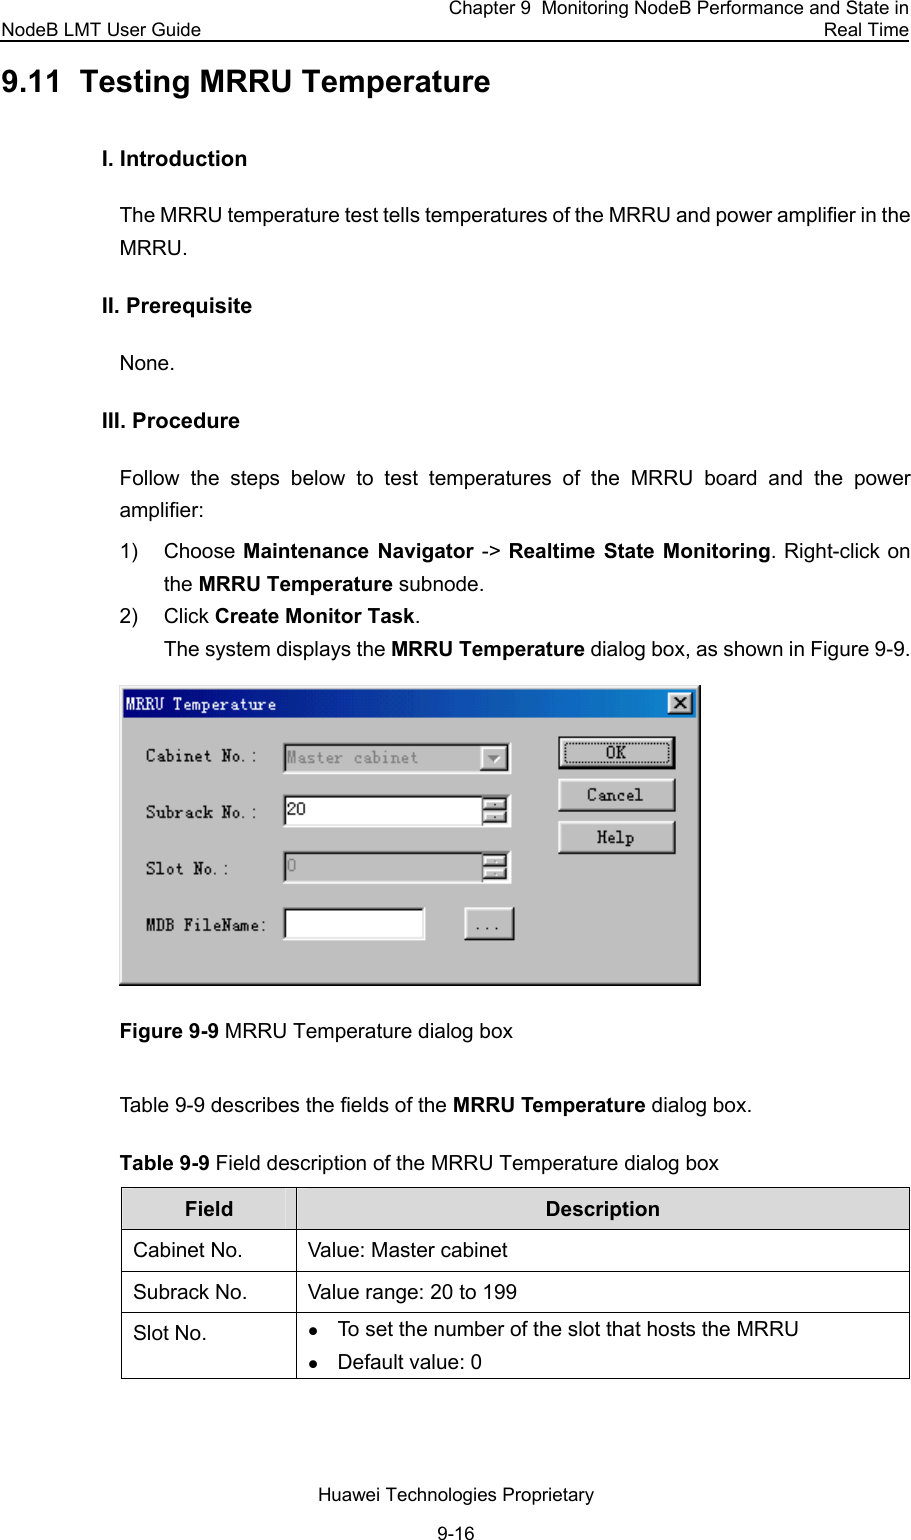 NodeB LMT User Guide Chapter 9  Monitoring NodeB Performance and State in Real Time Huawei Technologies Proprietary 9-16 9.11  Testing MRRU Temperature I. Introduction  The MRRU temperature test tells temperatures of the MRRU and power amplifier in the MRRU.  II. Prerequisite None.  III. Procedure Follow the steps below to test temperatures of the MRRU board and the power amplifier:  1) Choose Maintenance Navigator -&gt; Realtime State Monitoring. Right-click on the MRRU Temperature subnode.  2) Click Create Monitor Task. The system displays the MRRU Temperature dialog box, as shown in Figure 9-9.  Figure 9-9 MRRU Temperature dialog box  Table 9-9 describes the fields of the MRRU Temperature dialog box.  Table 9-9 Field description of the MRRU Temperature dialog box  Field  Description Cabinet No.  Value: Master cabinet Subrack No.  Value range: 20 to 199  Slot No.  z To set the number of the slot that hosts the MRRU z Default value: 0 